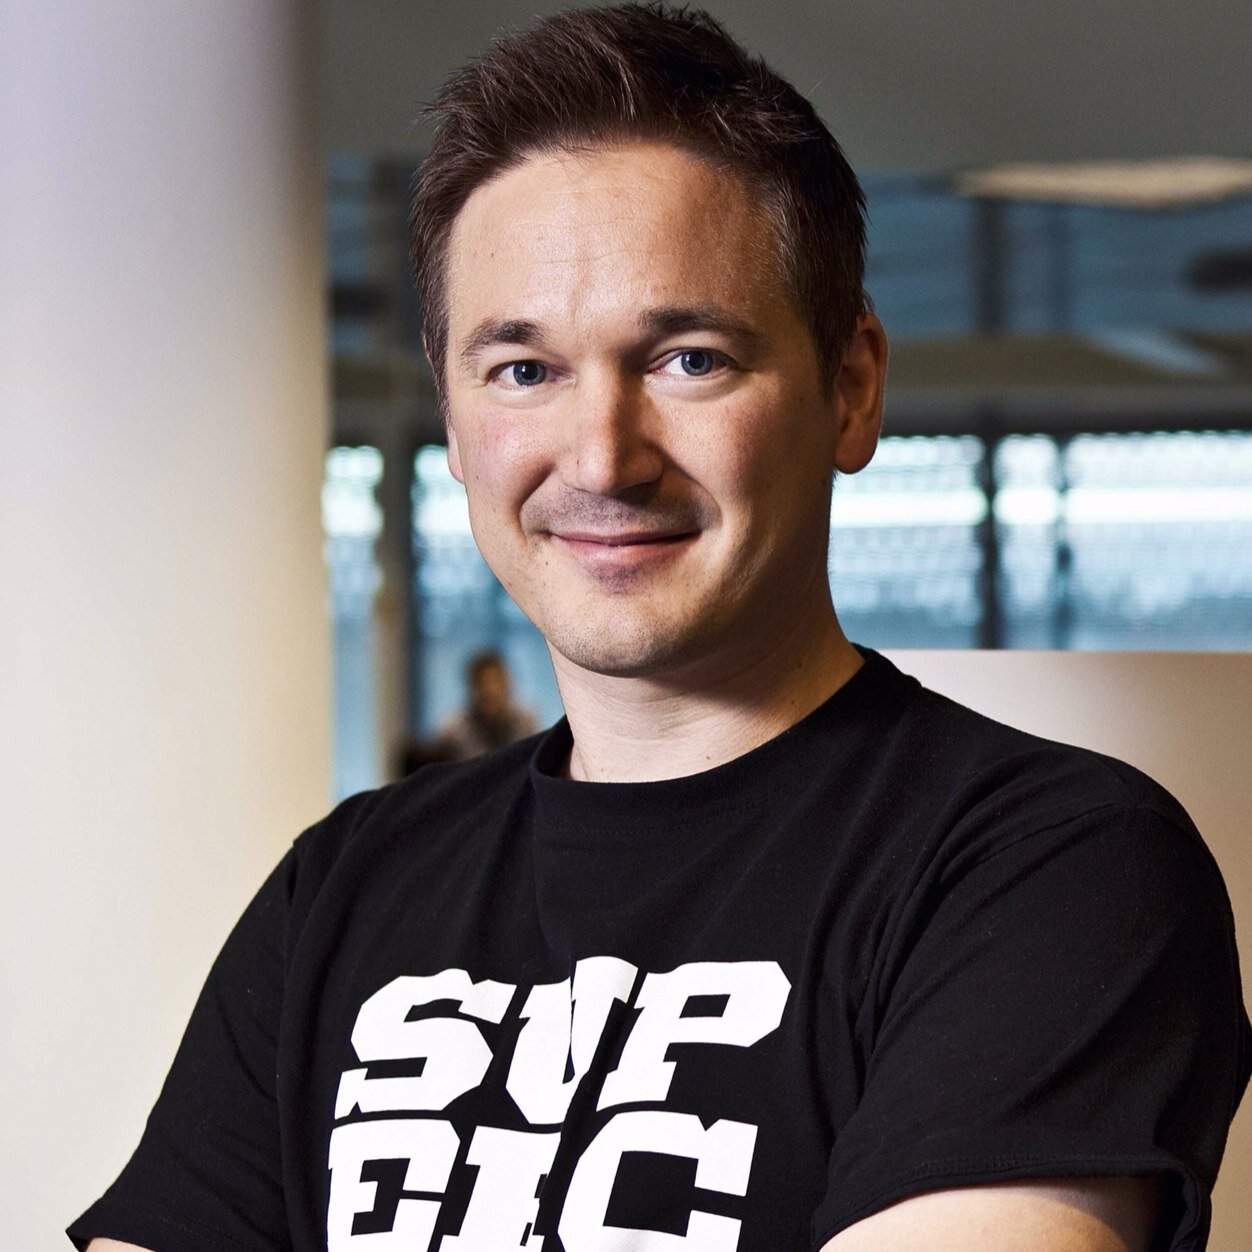 CEO & co-founder, Supercell.